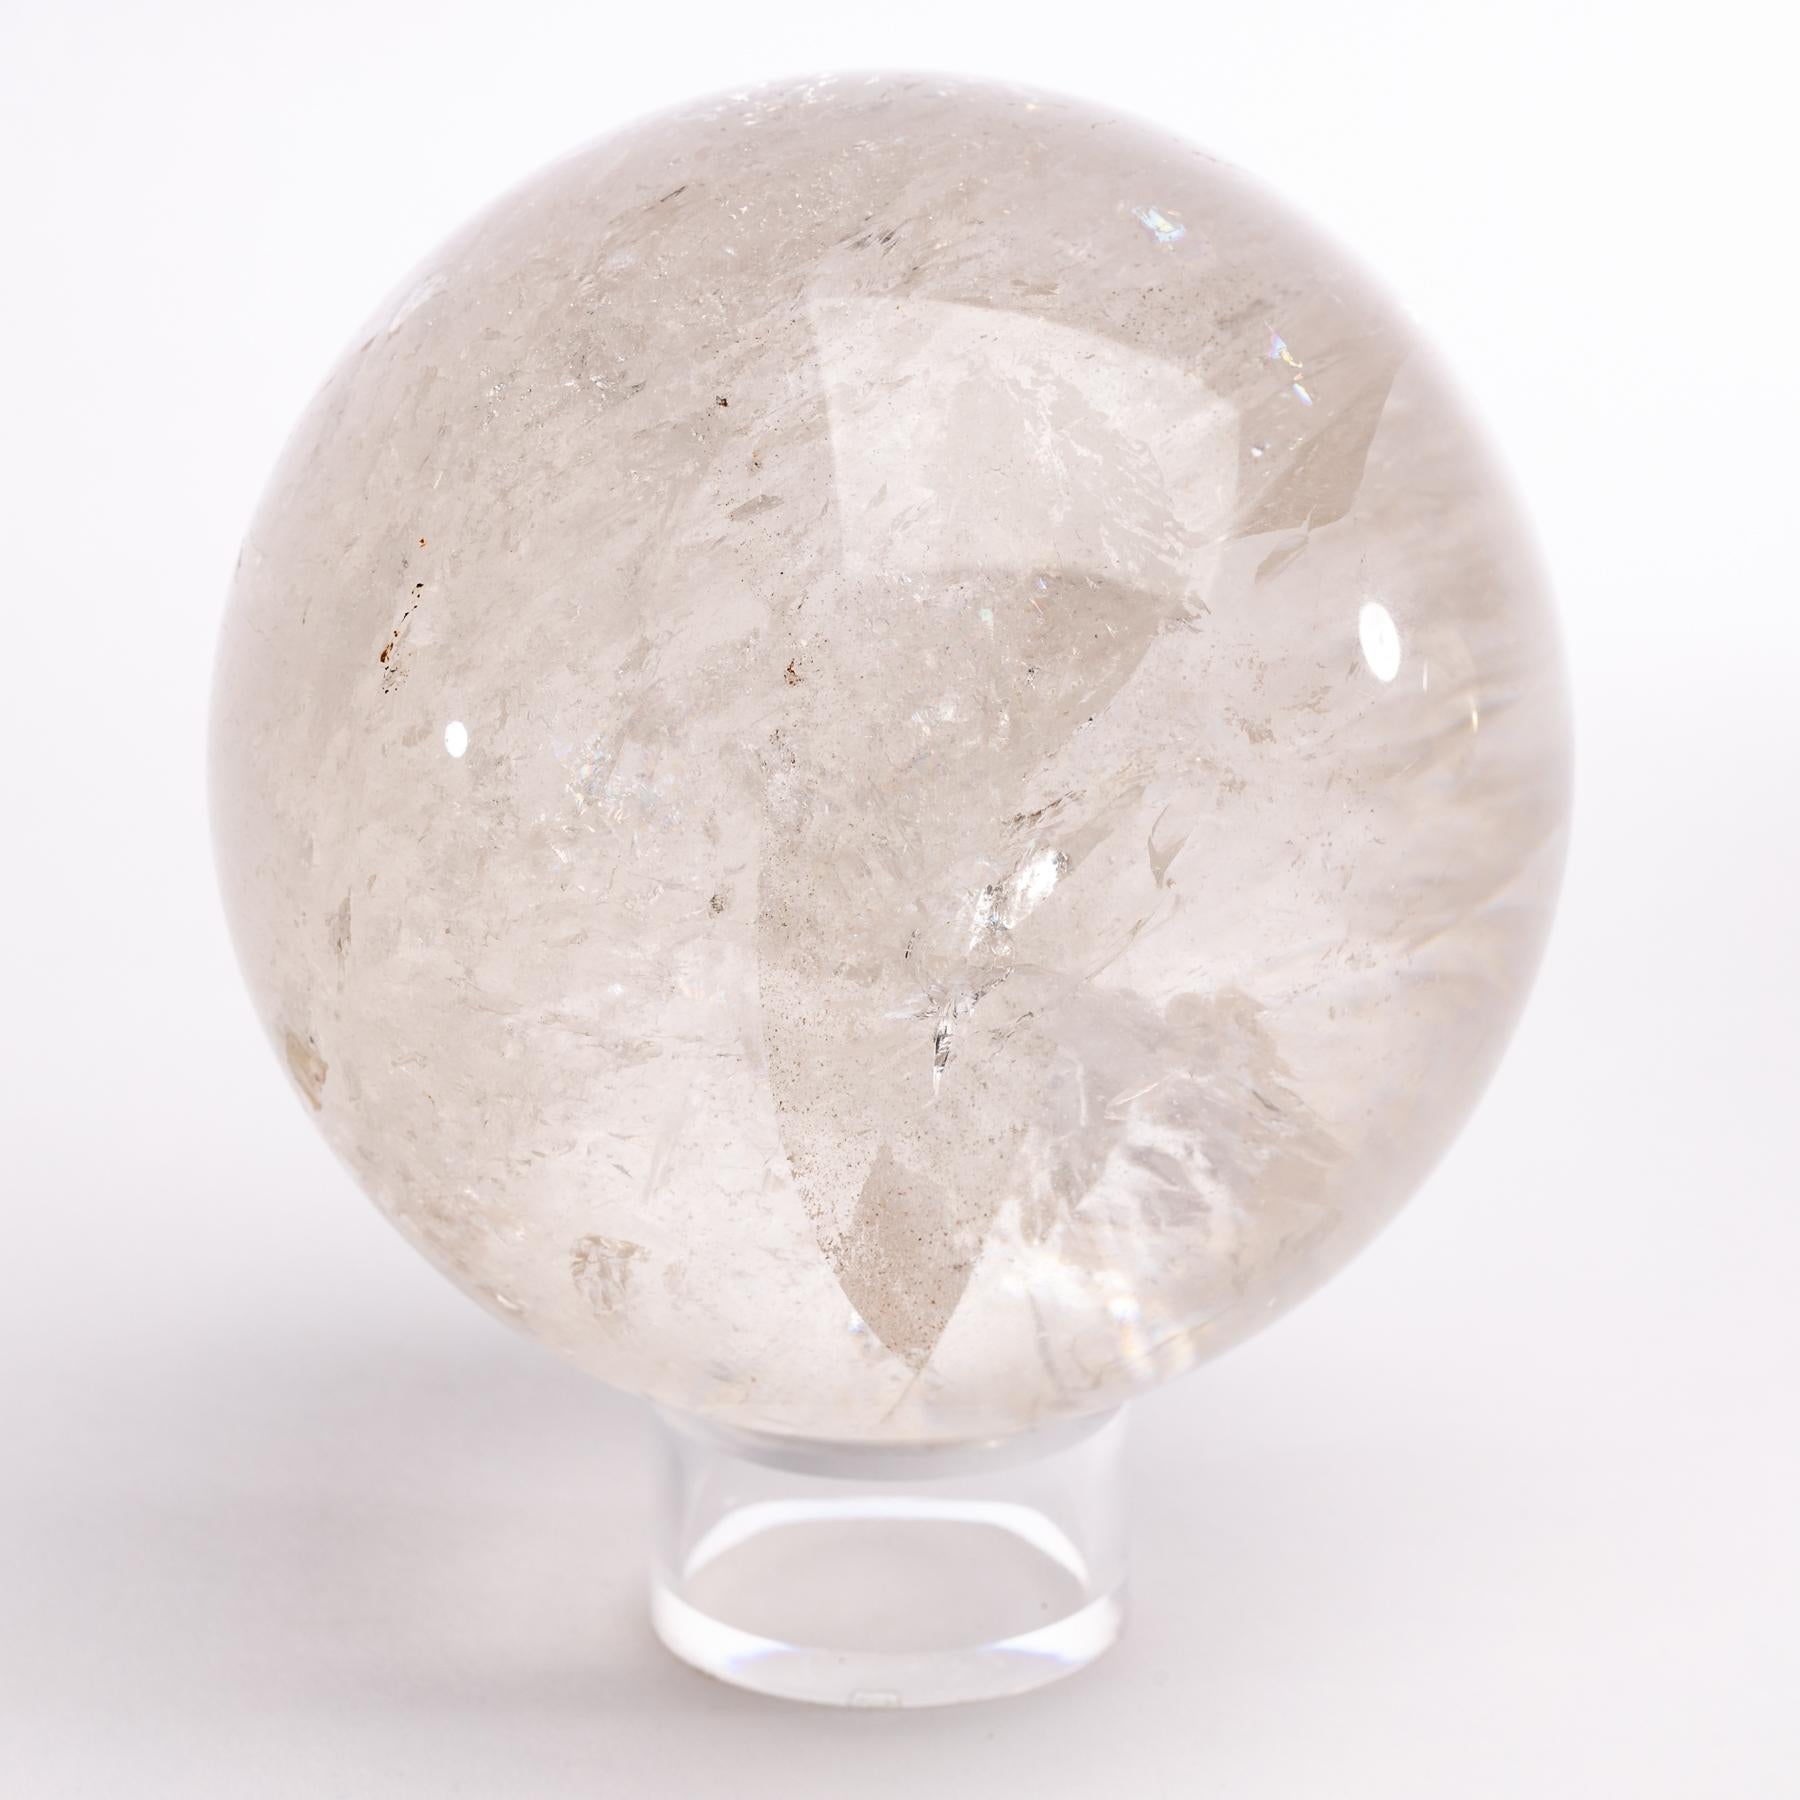 Large clear Brazilian quartz sphere mounted on a acrylic ring.